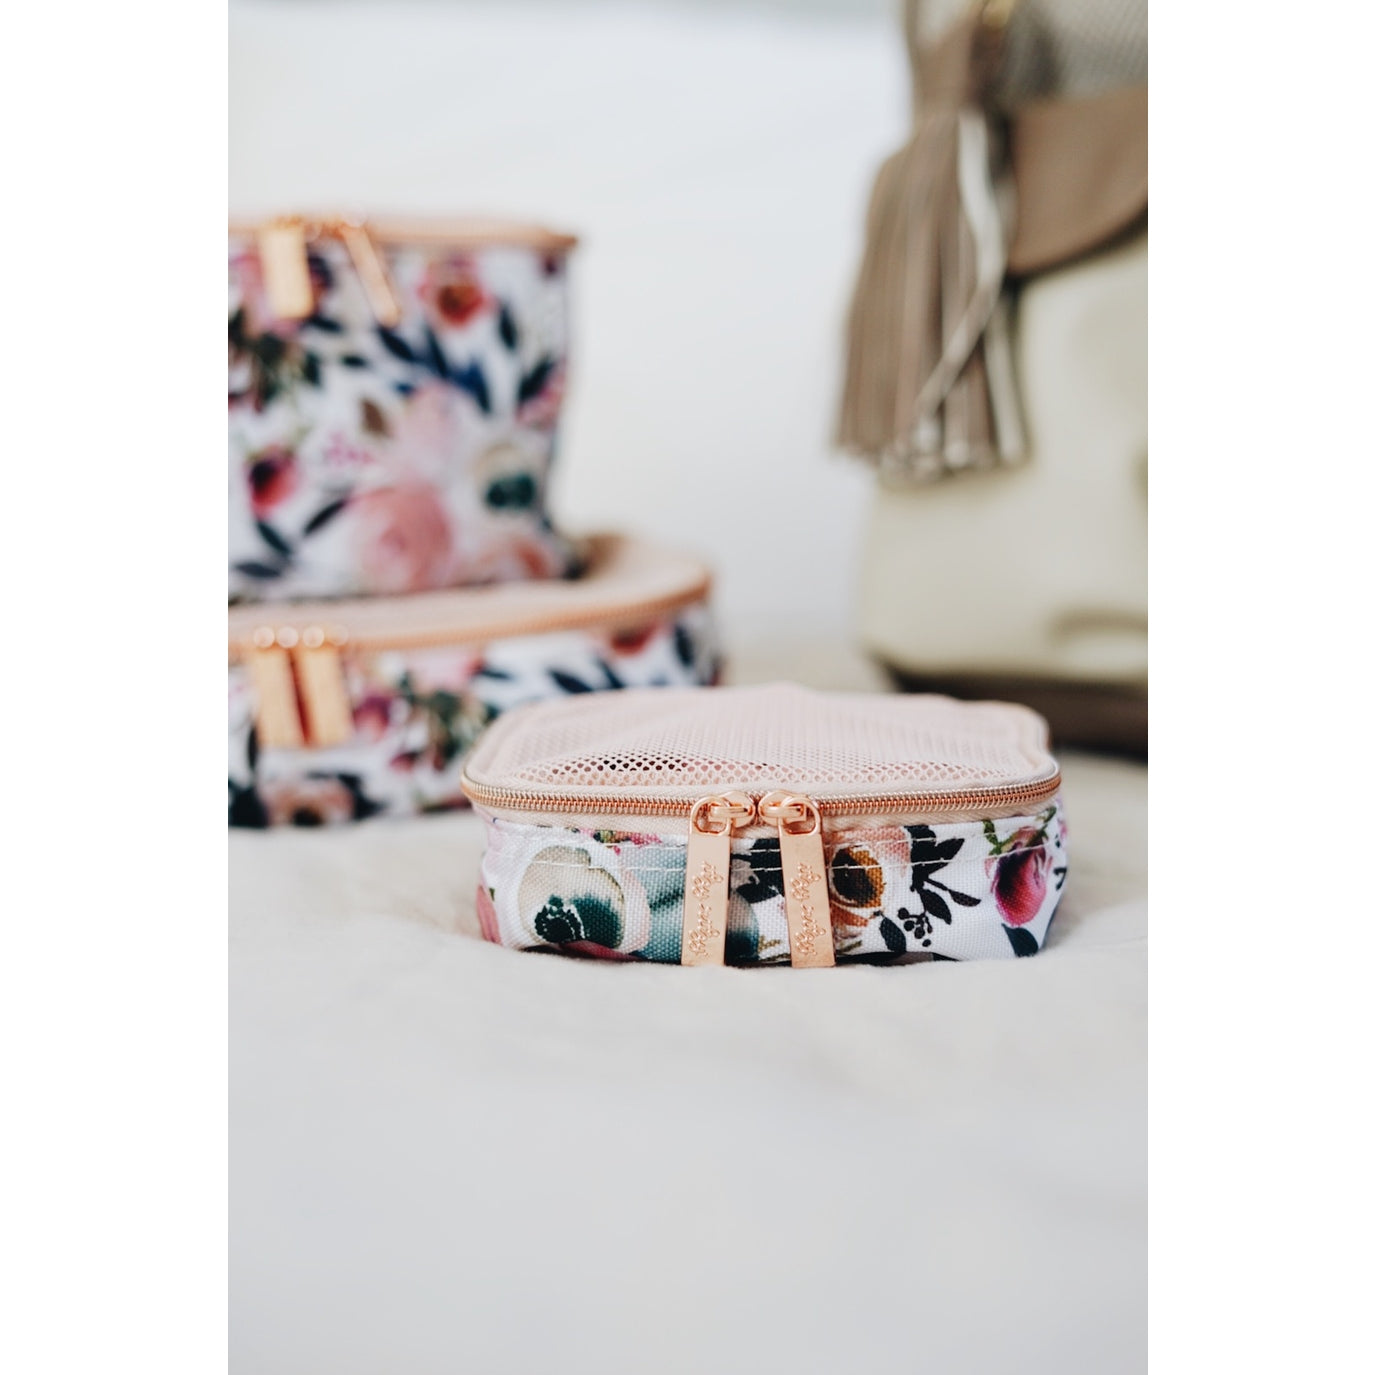 Blush Floral Pack Like a Boss™ Diaper Bag Packing Cubes